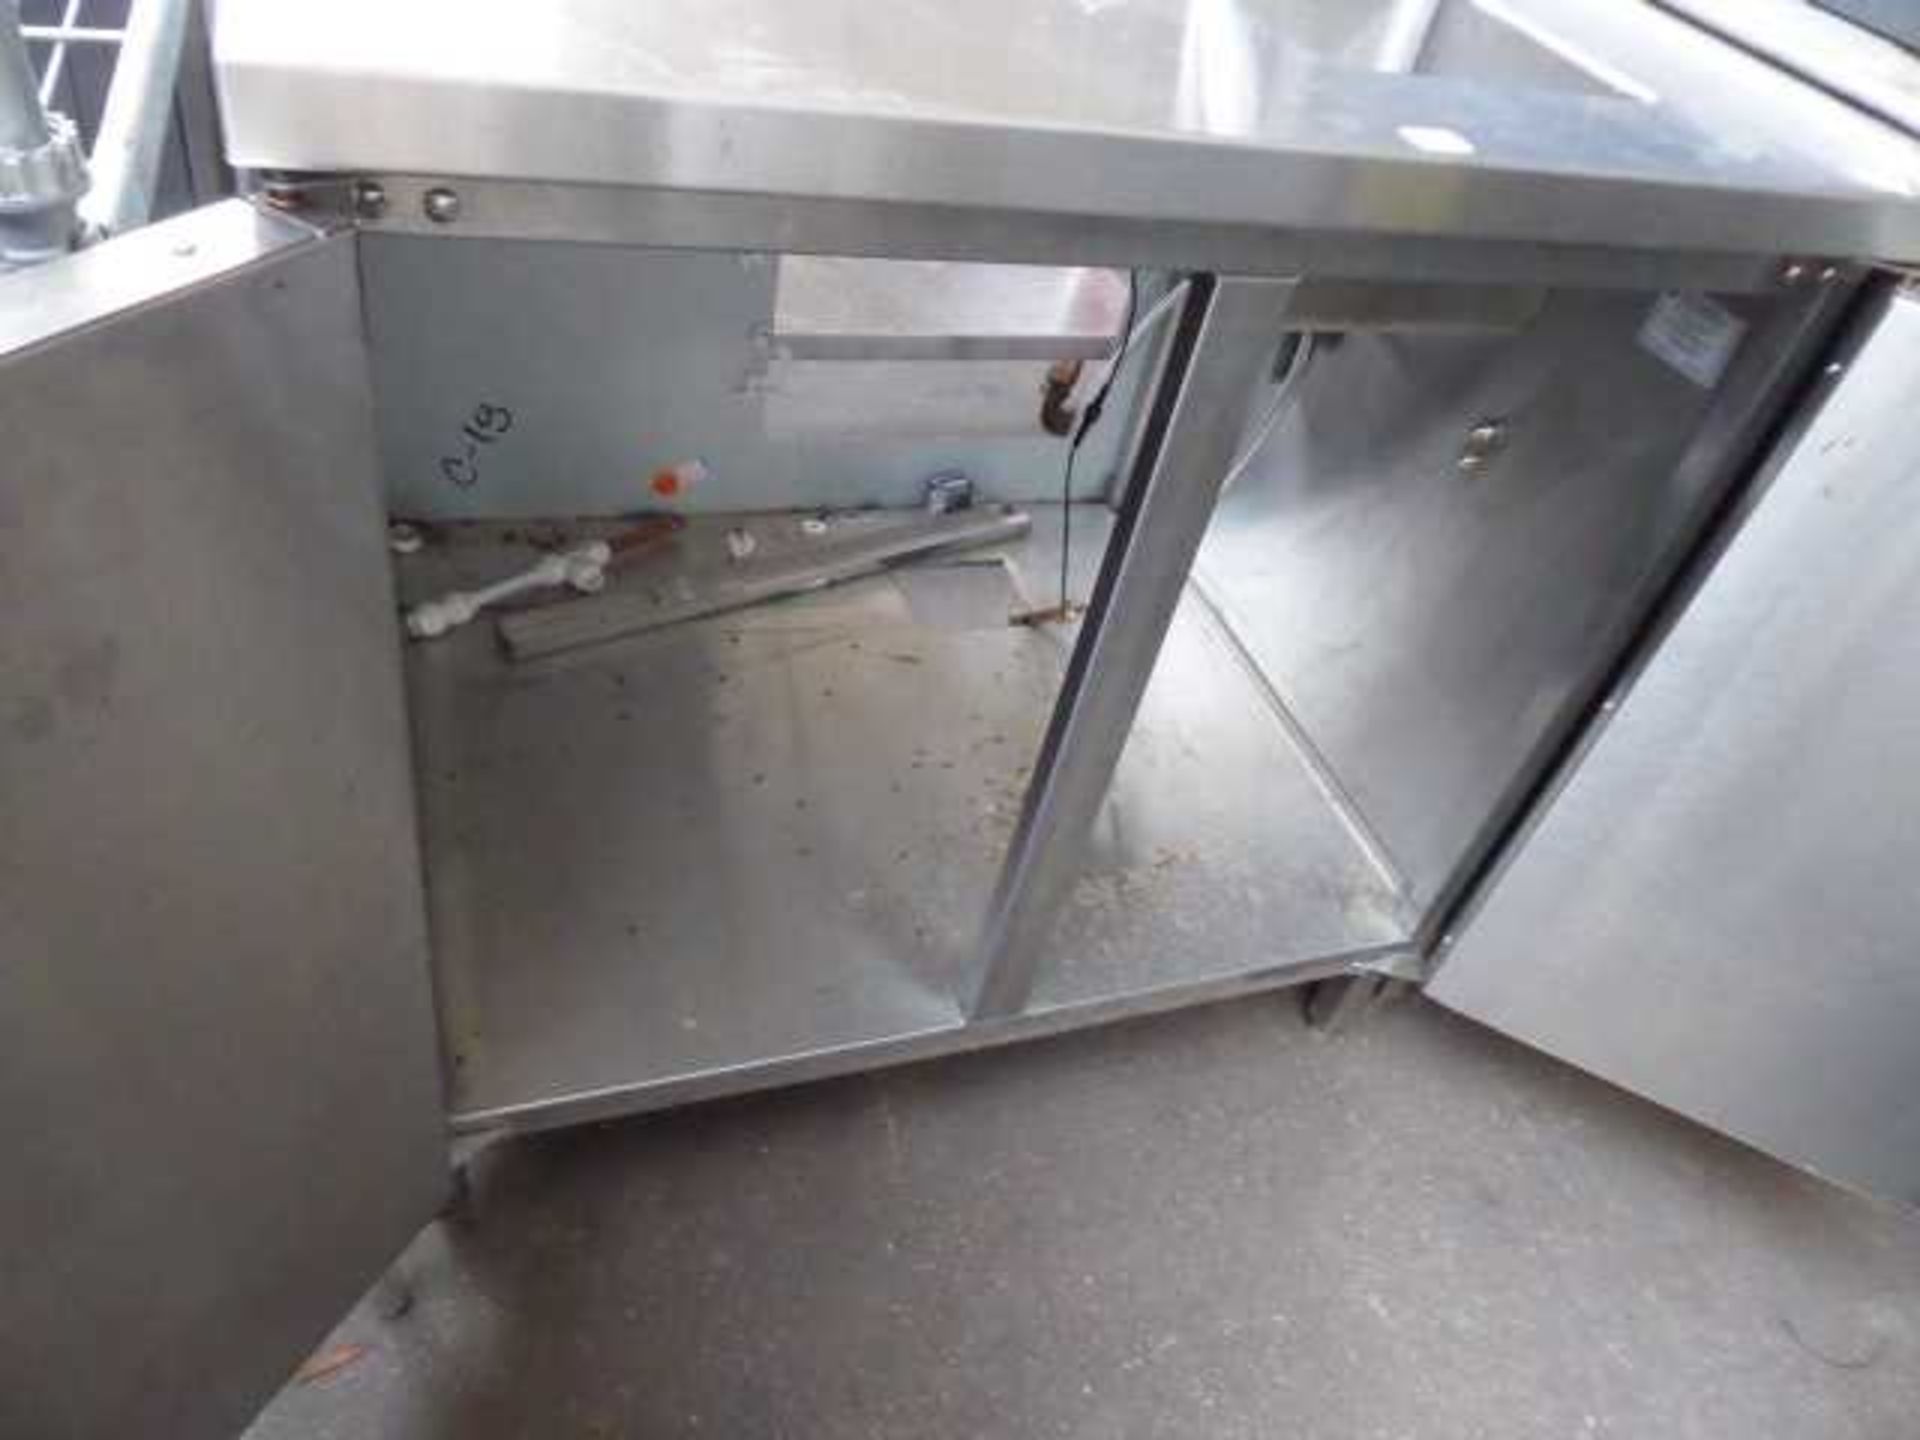 90cm stainless steel surface with small hand basin and double door cabinet under - Image 2 of 2